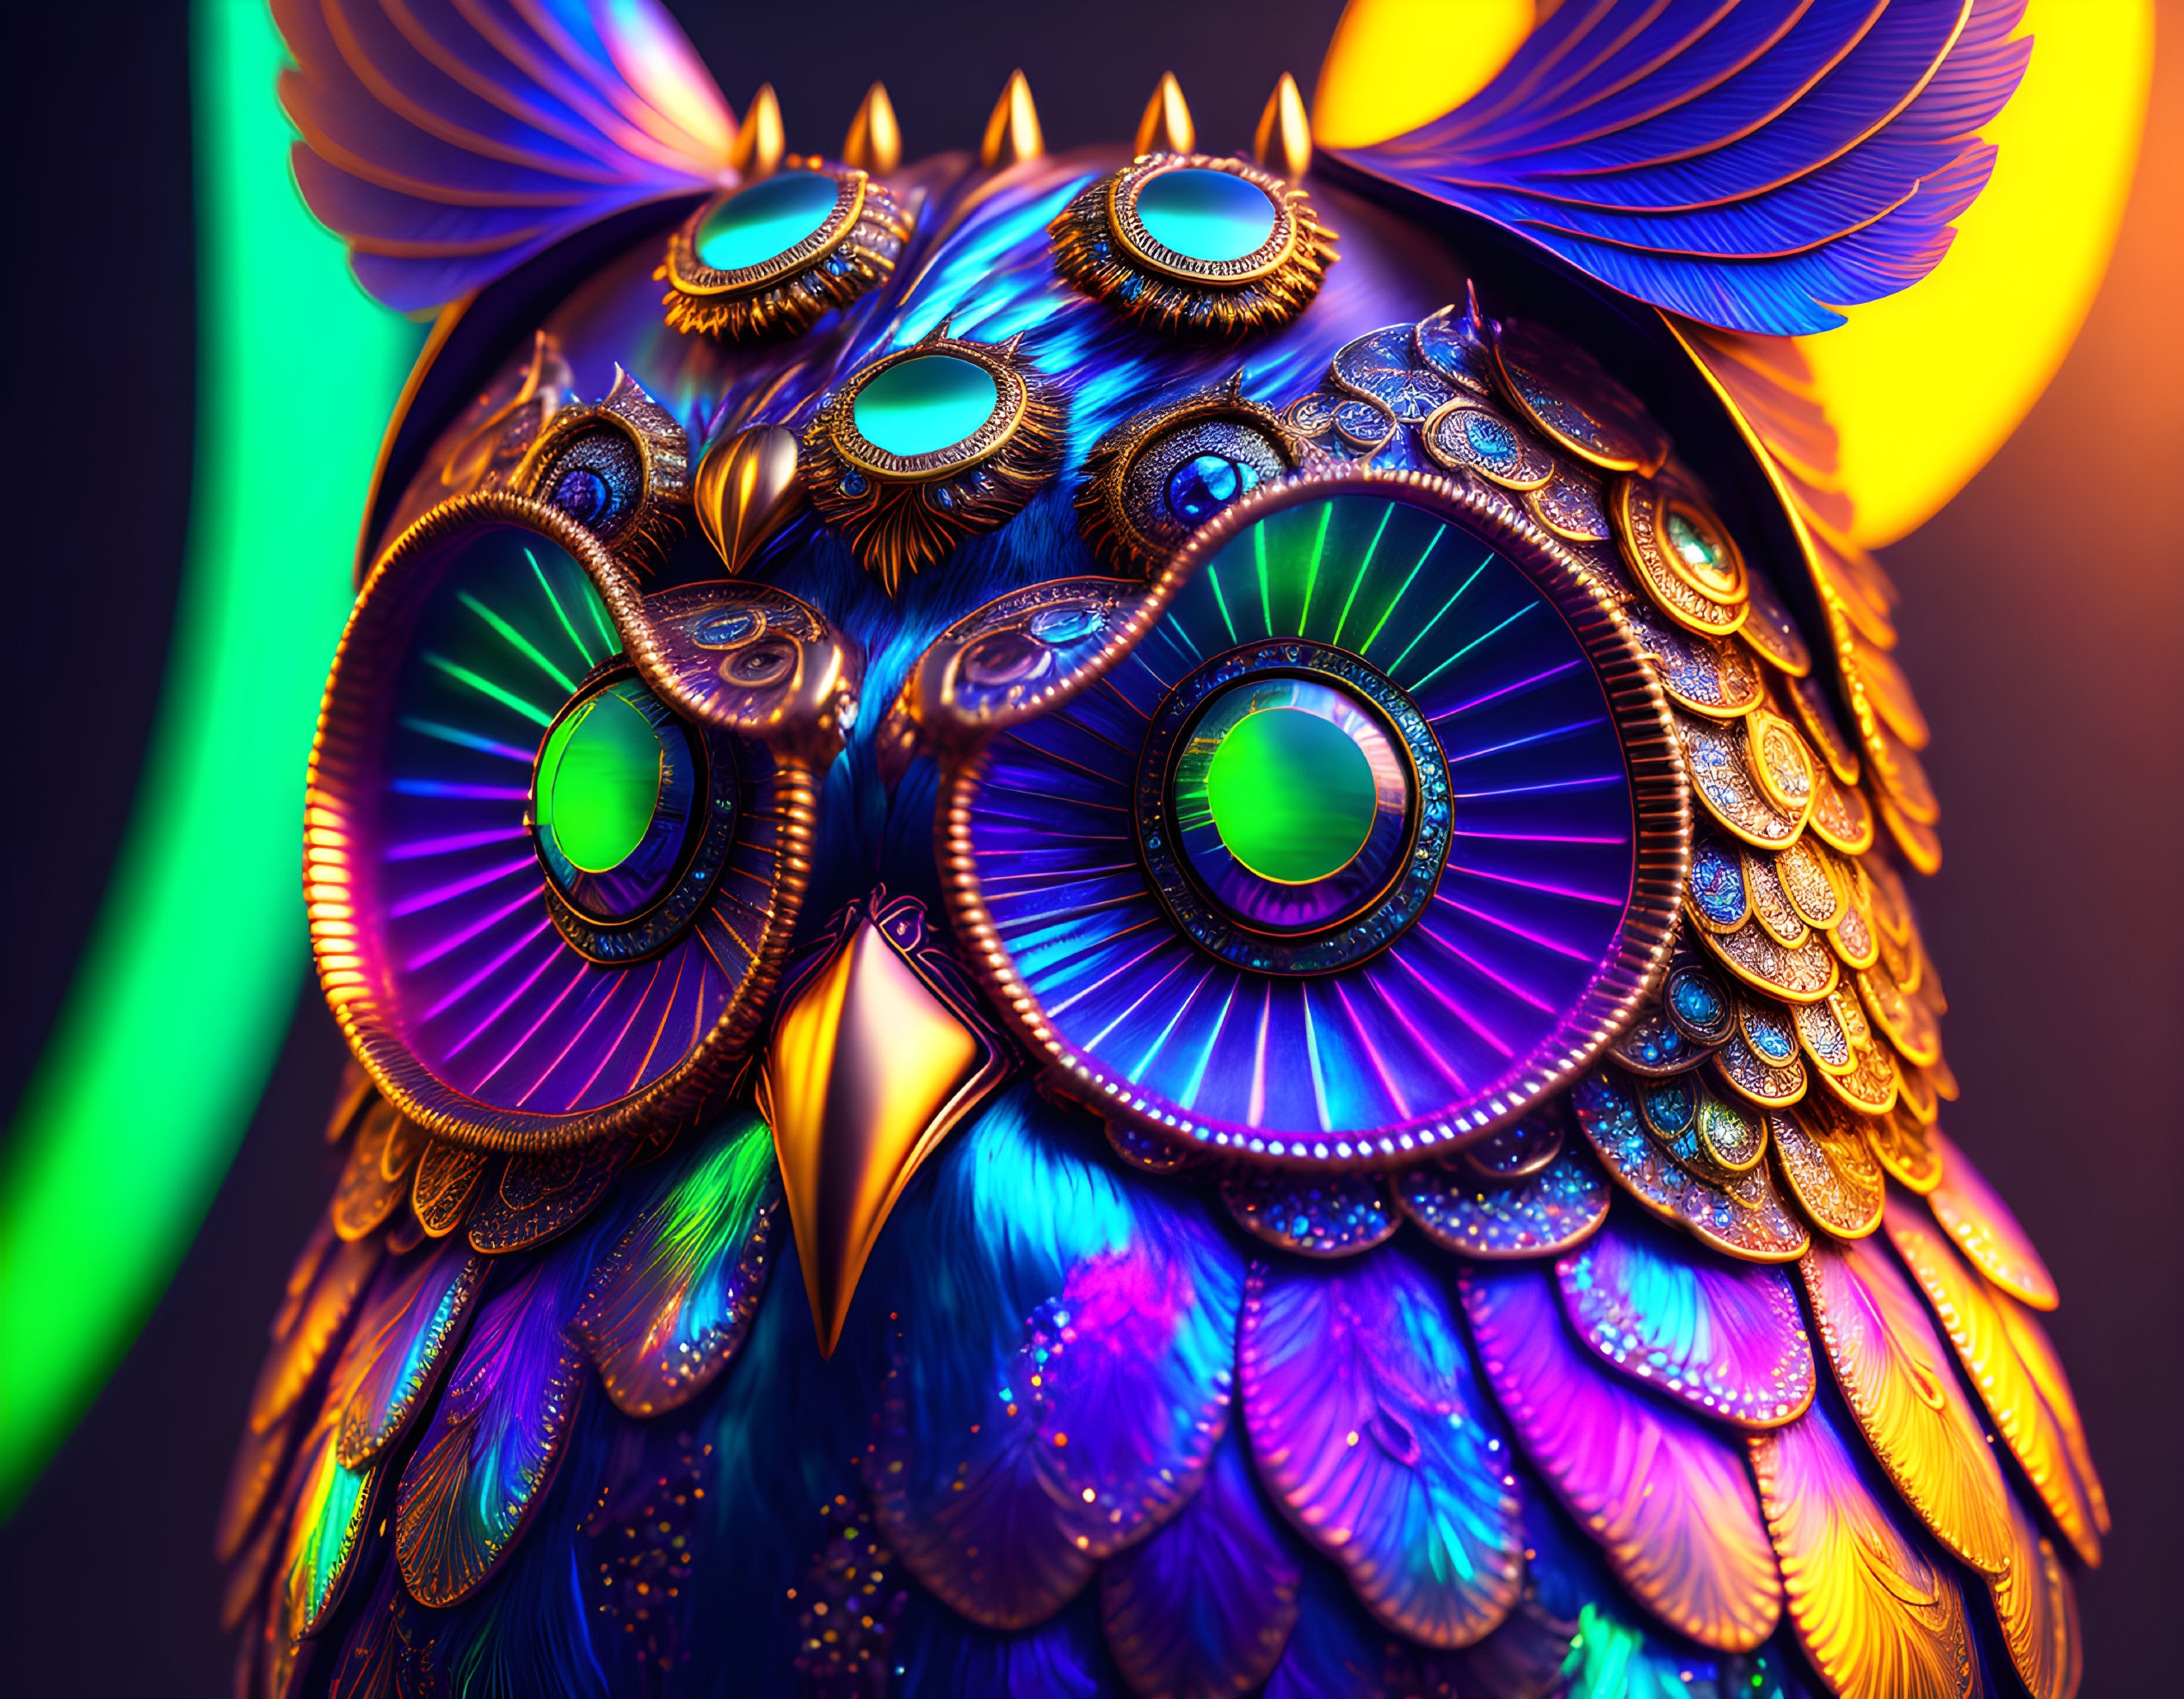 Colorful Owl Art: Intricate patterns and rainbow feathers on dark background